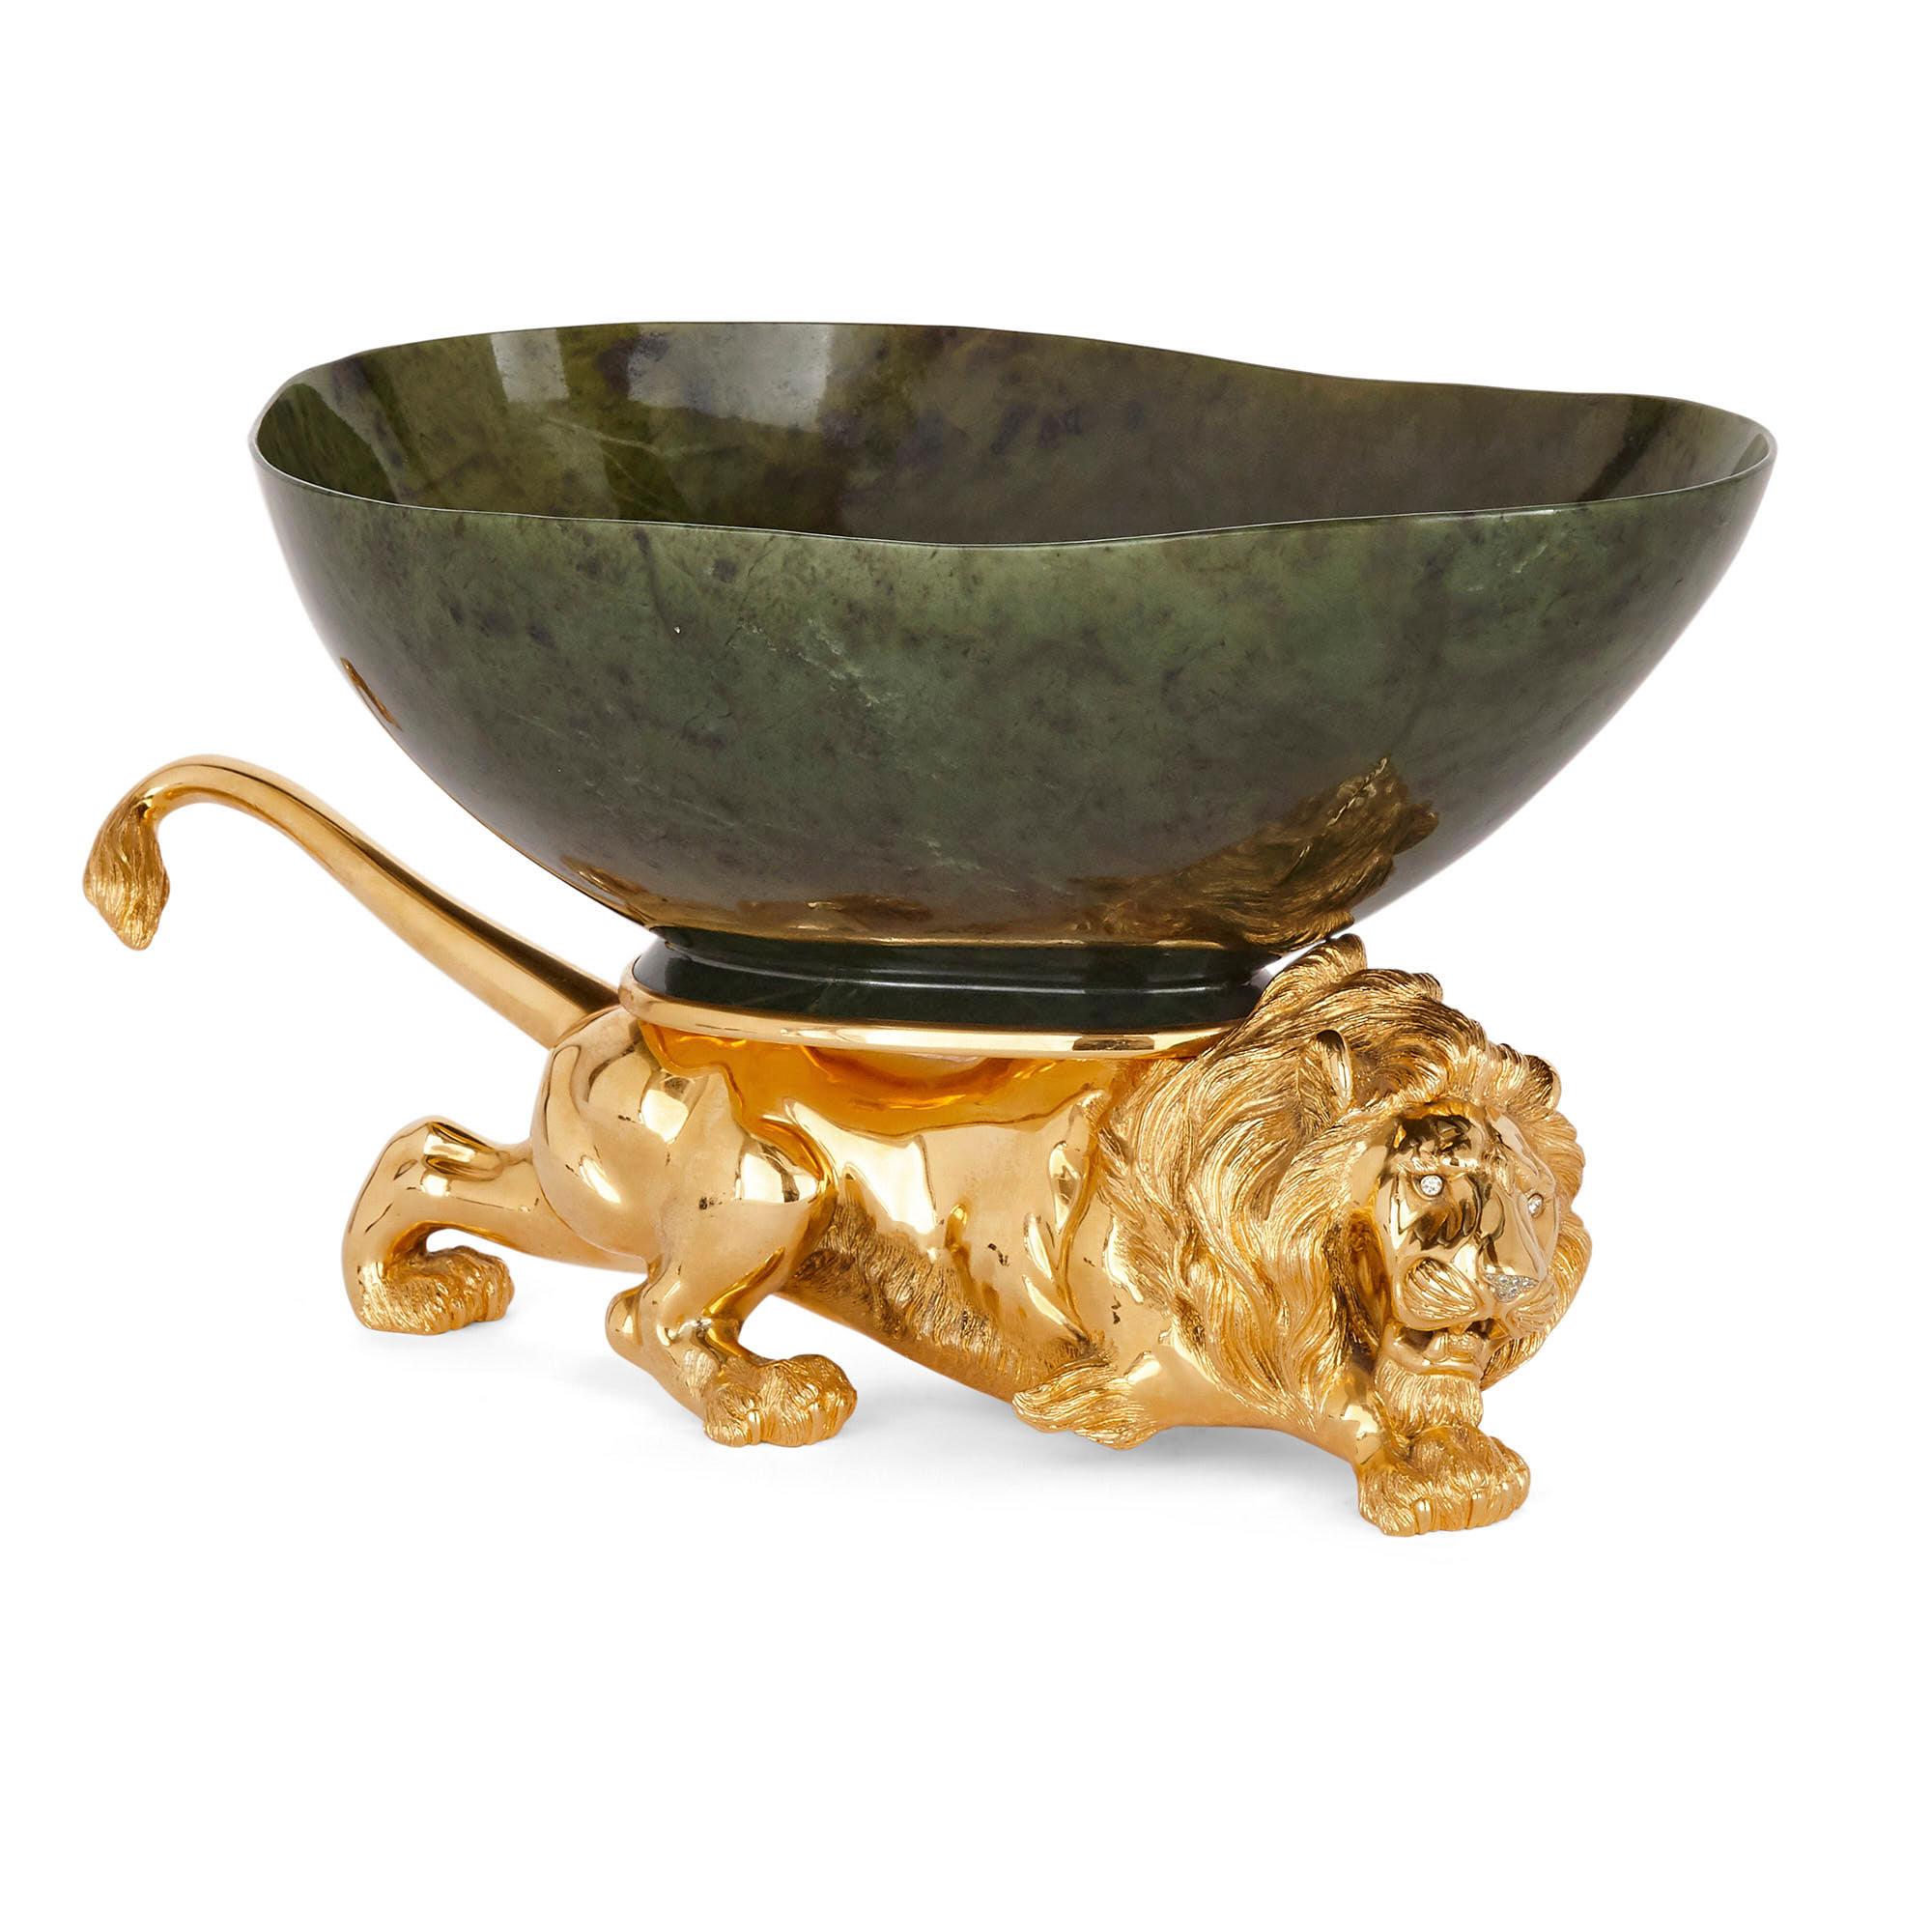 20th century silver-gilt and nephrite crouching lion decorative bowl
Continental, c. 1970s
Dimensions: Height 22cm, width 42cm, depth 24cm

Beautifully crafted from nephrite, sterling silver-gilt, and white diamonds, this 1970s centrepiece bowl